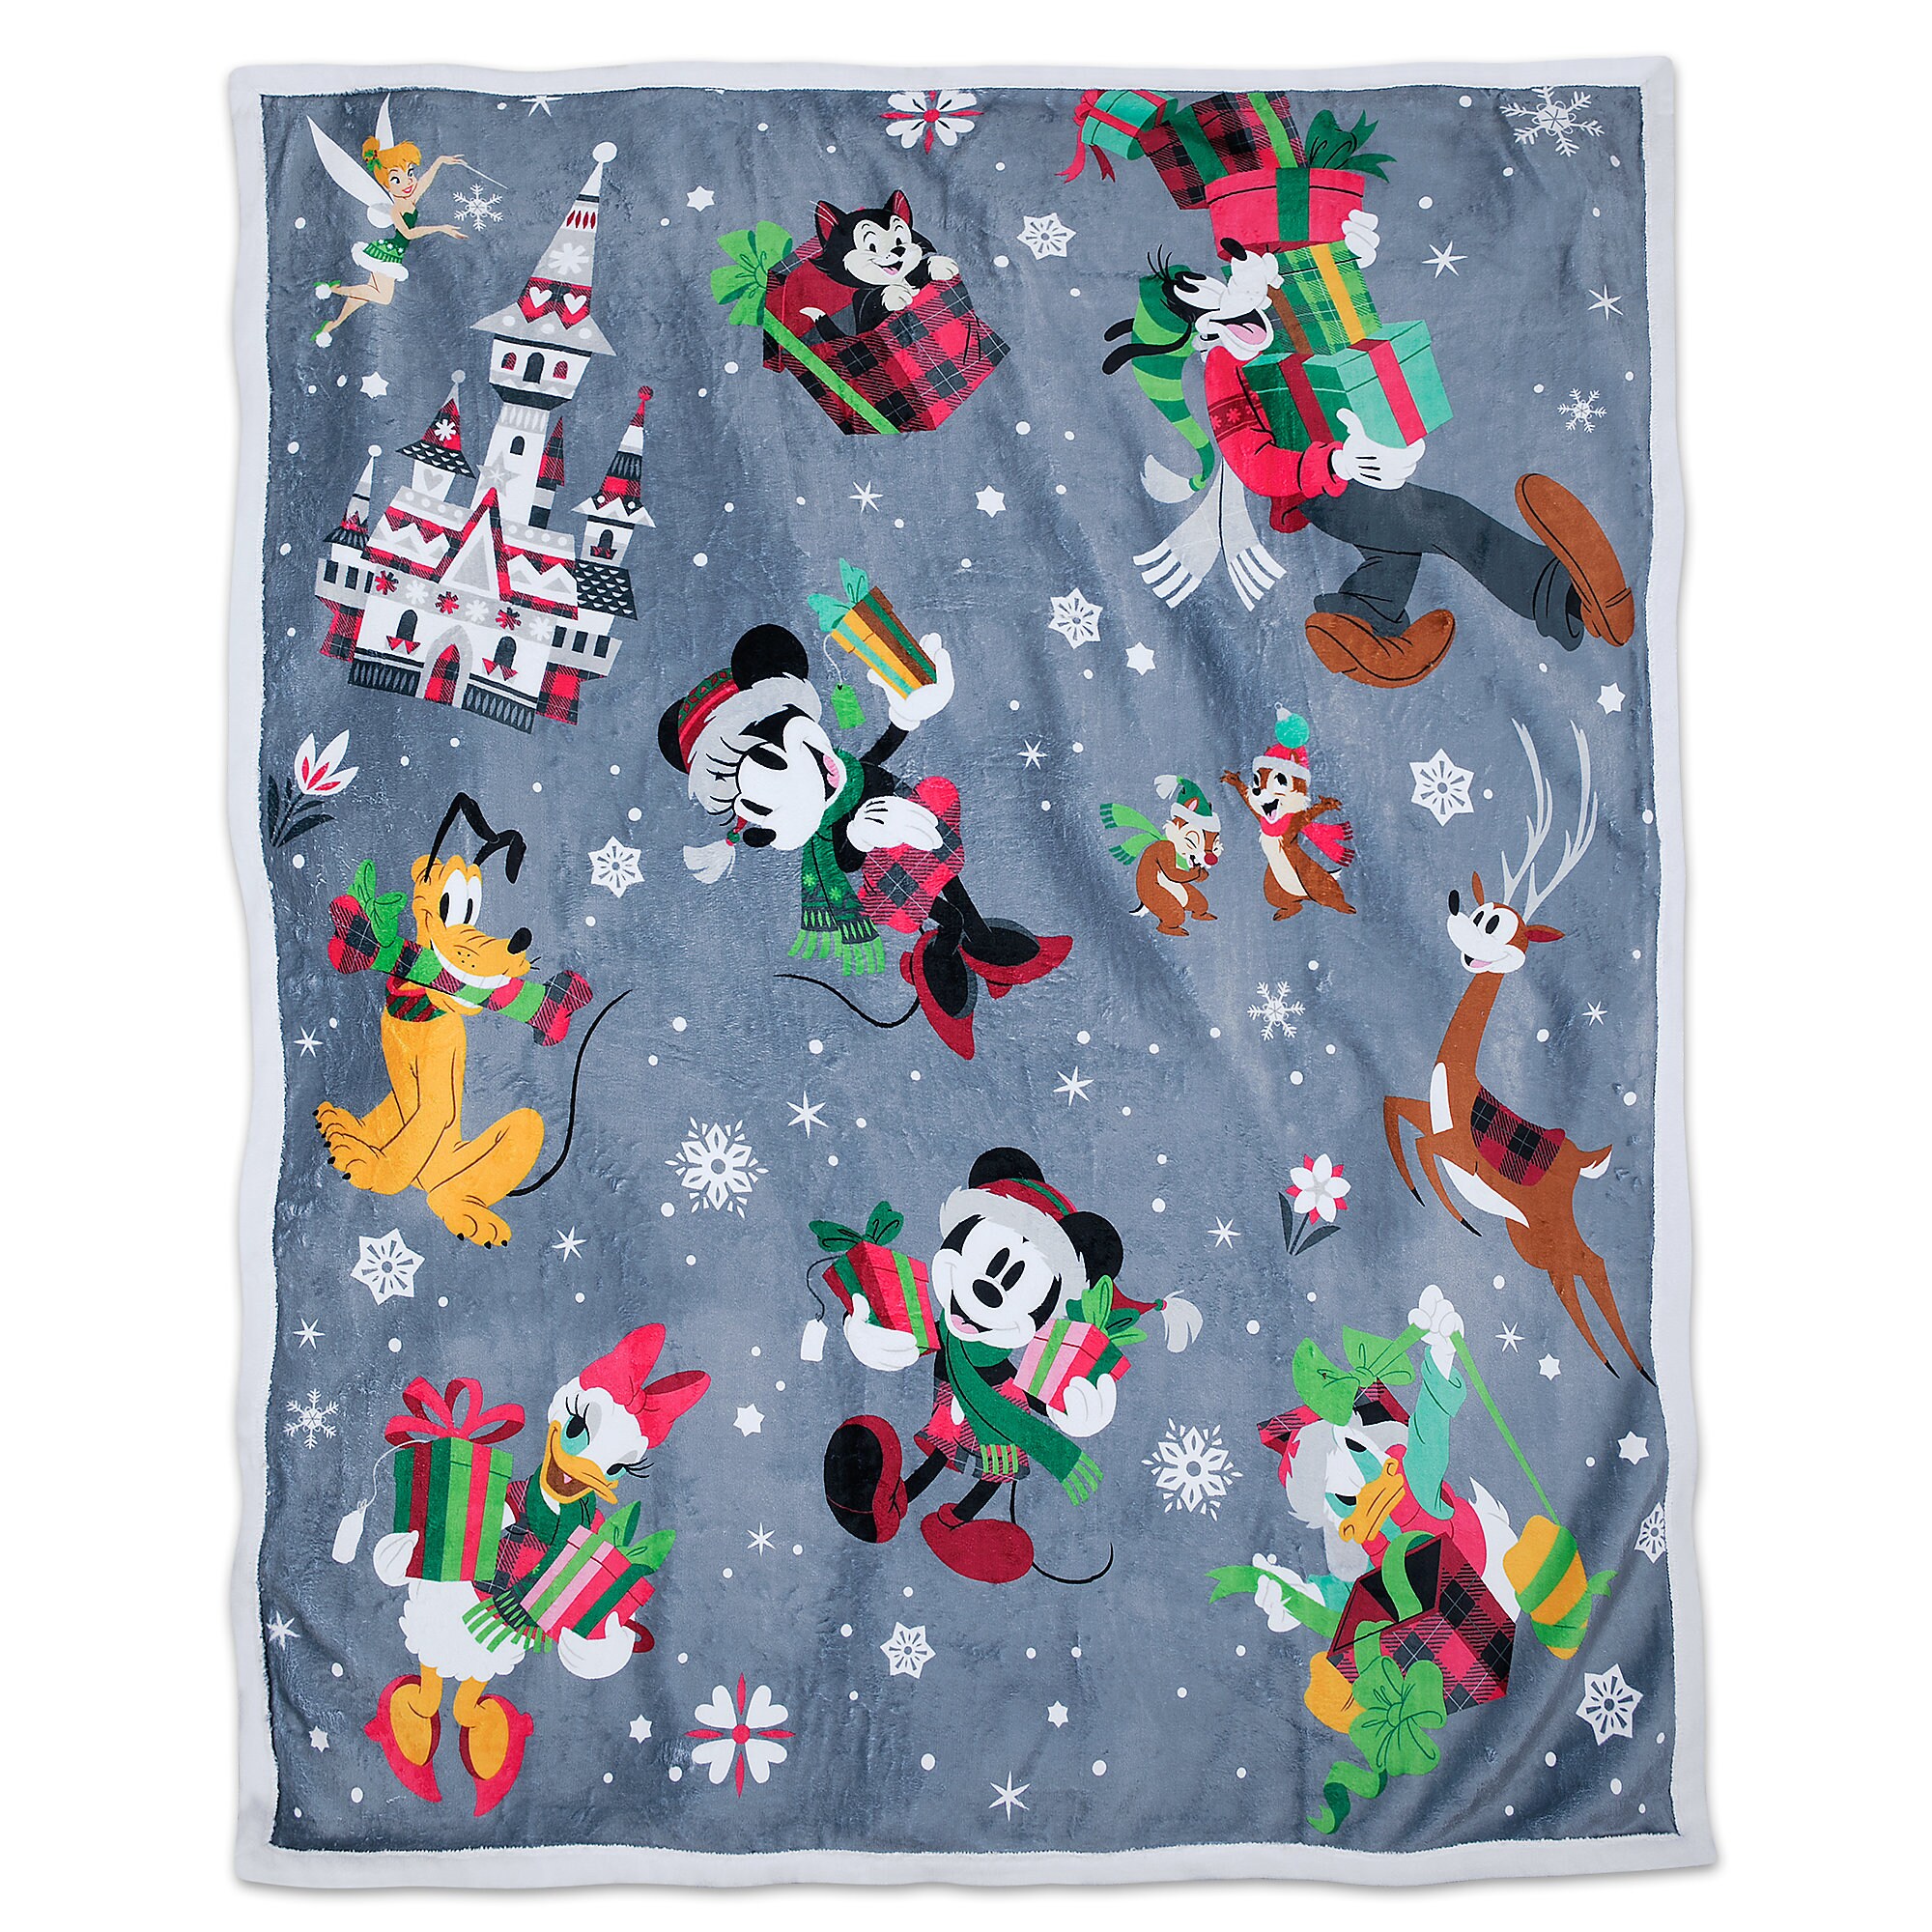 Santa Mickey Mouse and Friends Reversible Throw